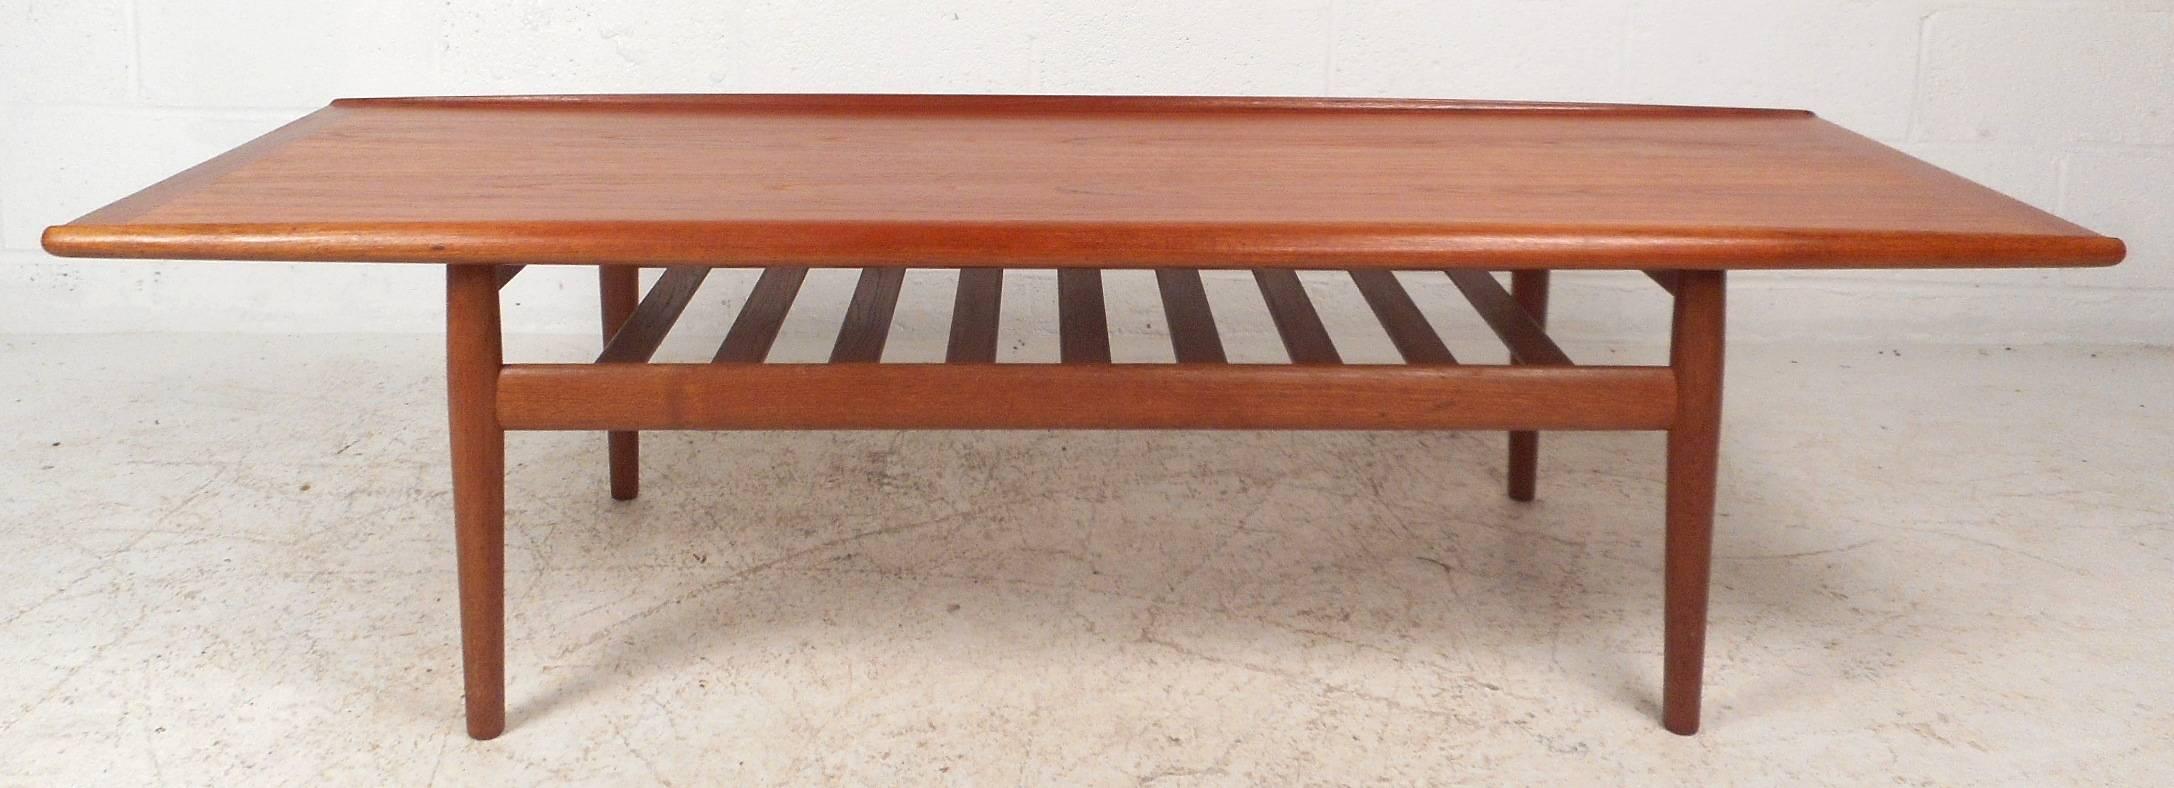 This beautiful vintage modern coffee table features unique raised edges on top and stylish tapered legs. The sleek Grete Jalk design has a bottom slatted tier for additional storage. Quality construction with a rich teak finish makes the perfect